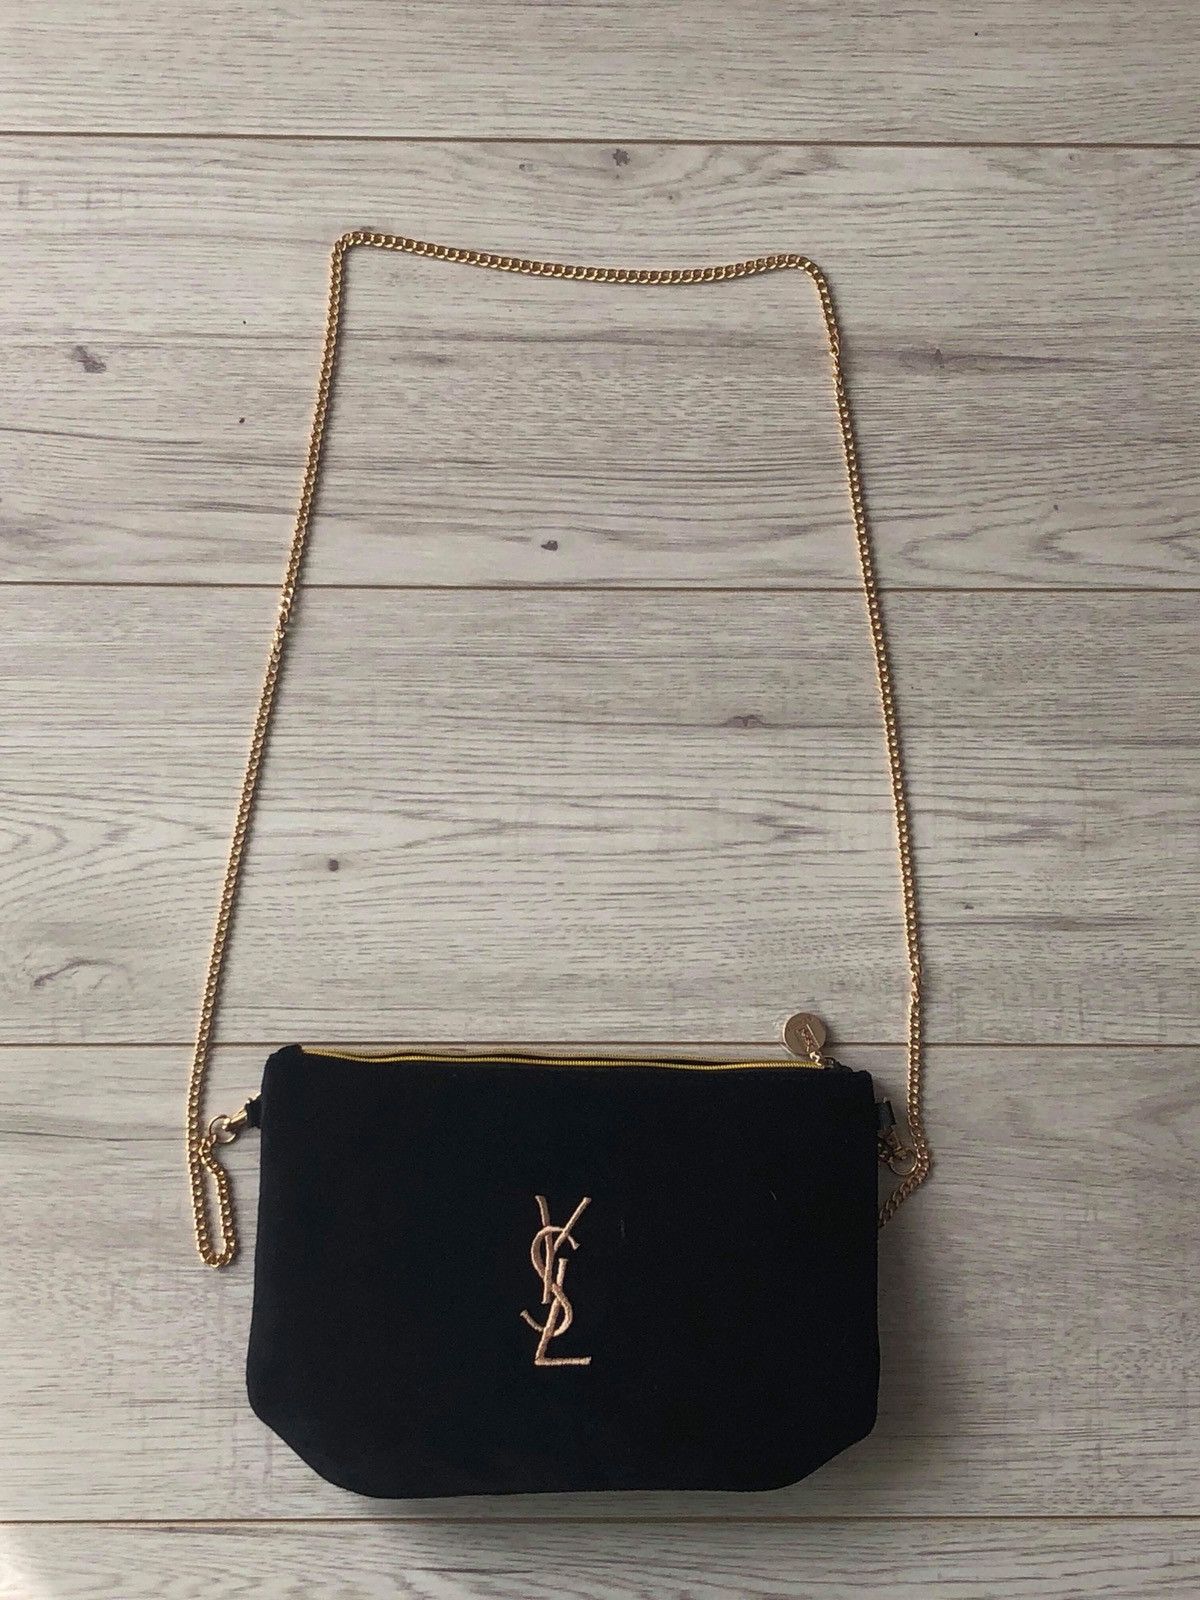 Pin by Shah.vip on Ysl  Bags, Chain bags, Saint laurent